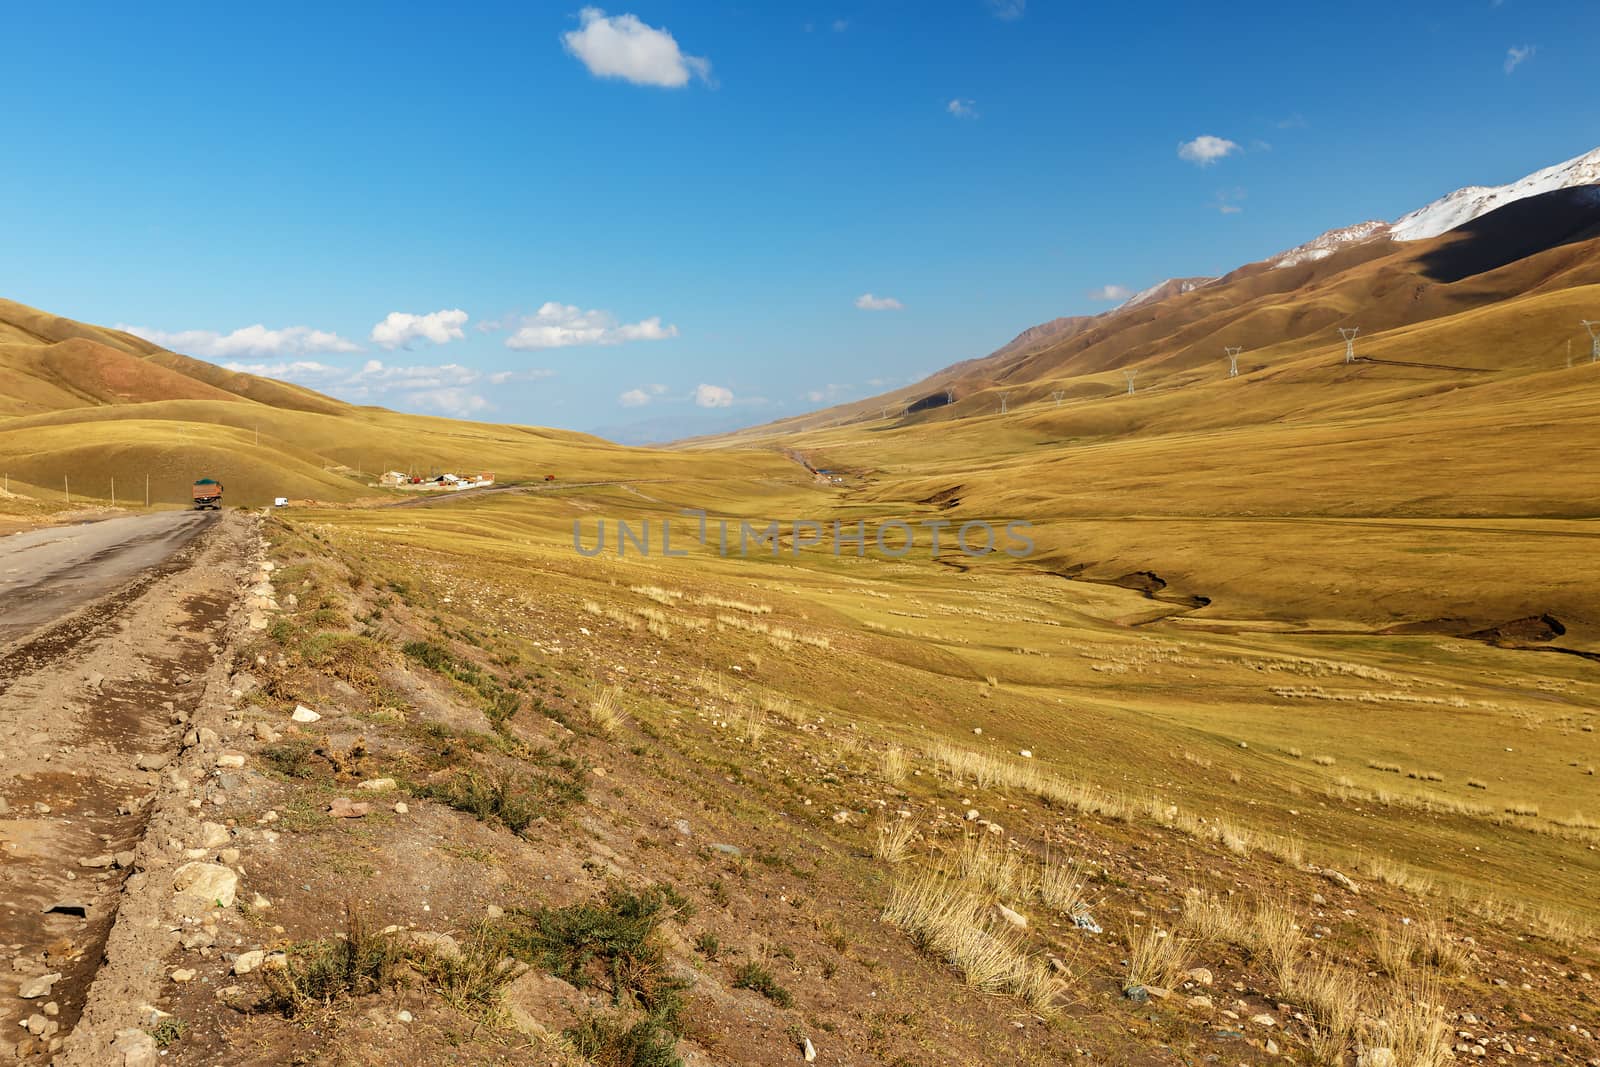 A367 highway passing in the Naryn region of Kyrgyzstan. road to the Kyzart pass.